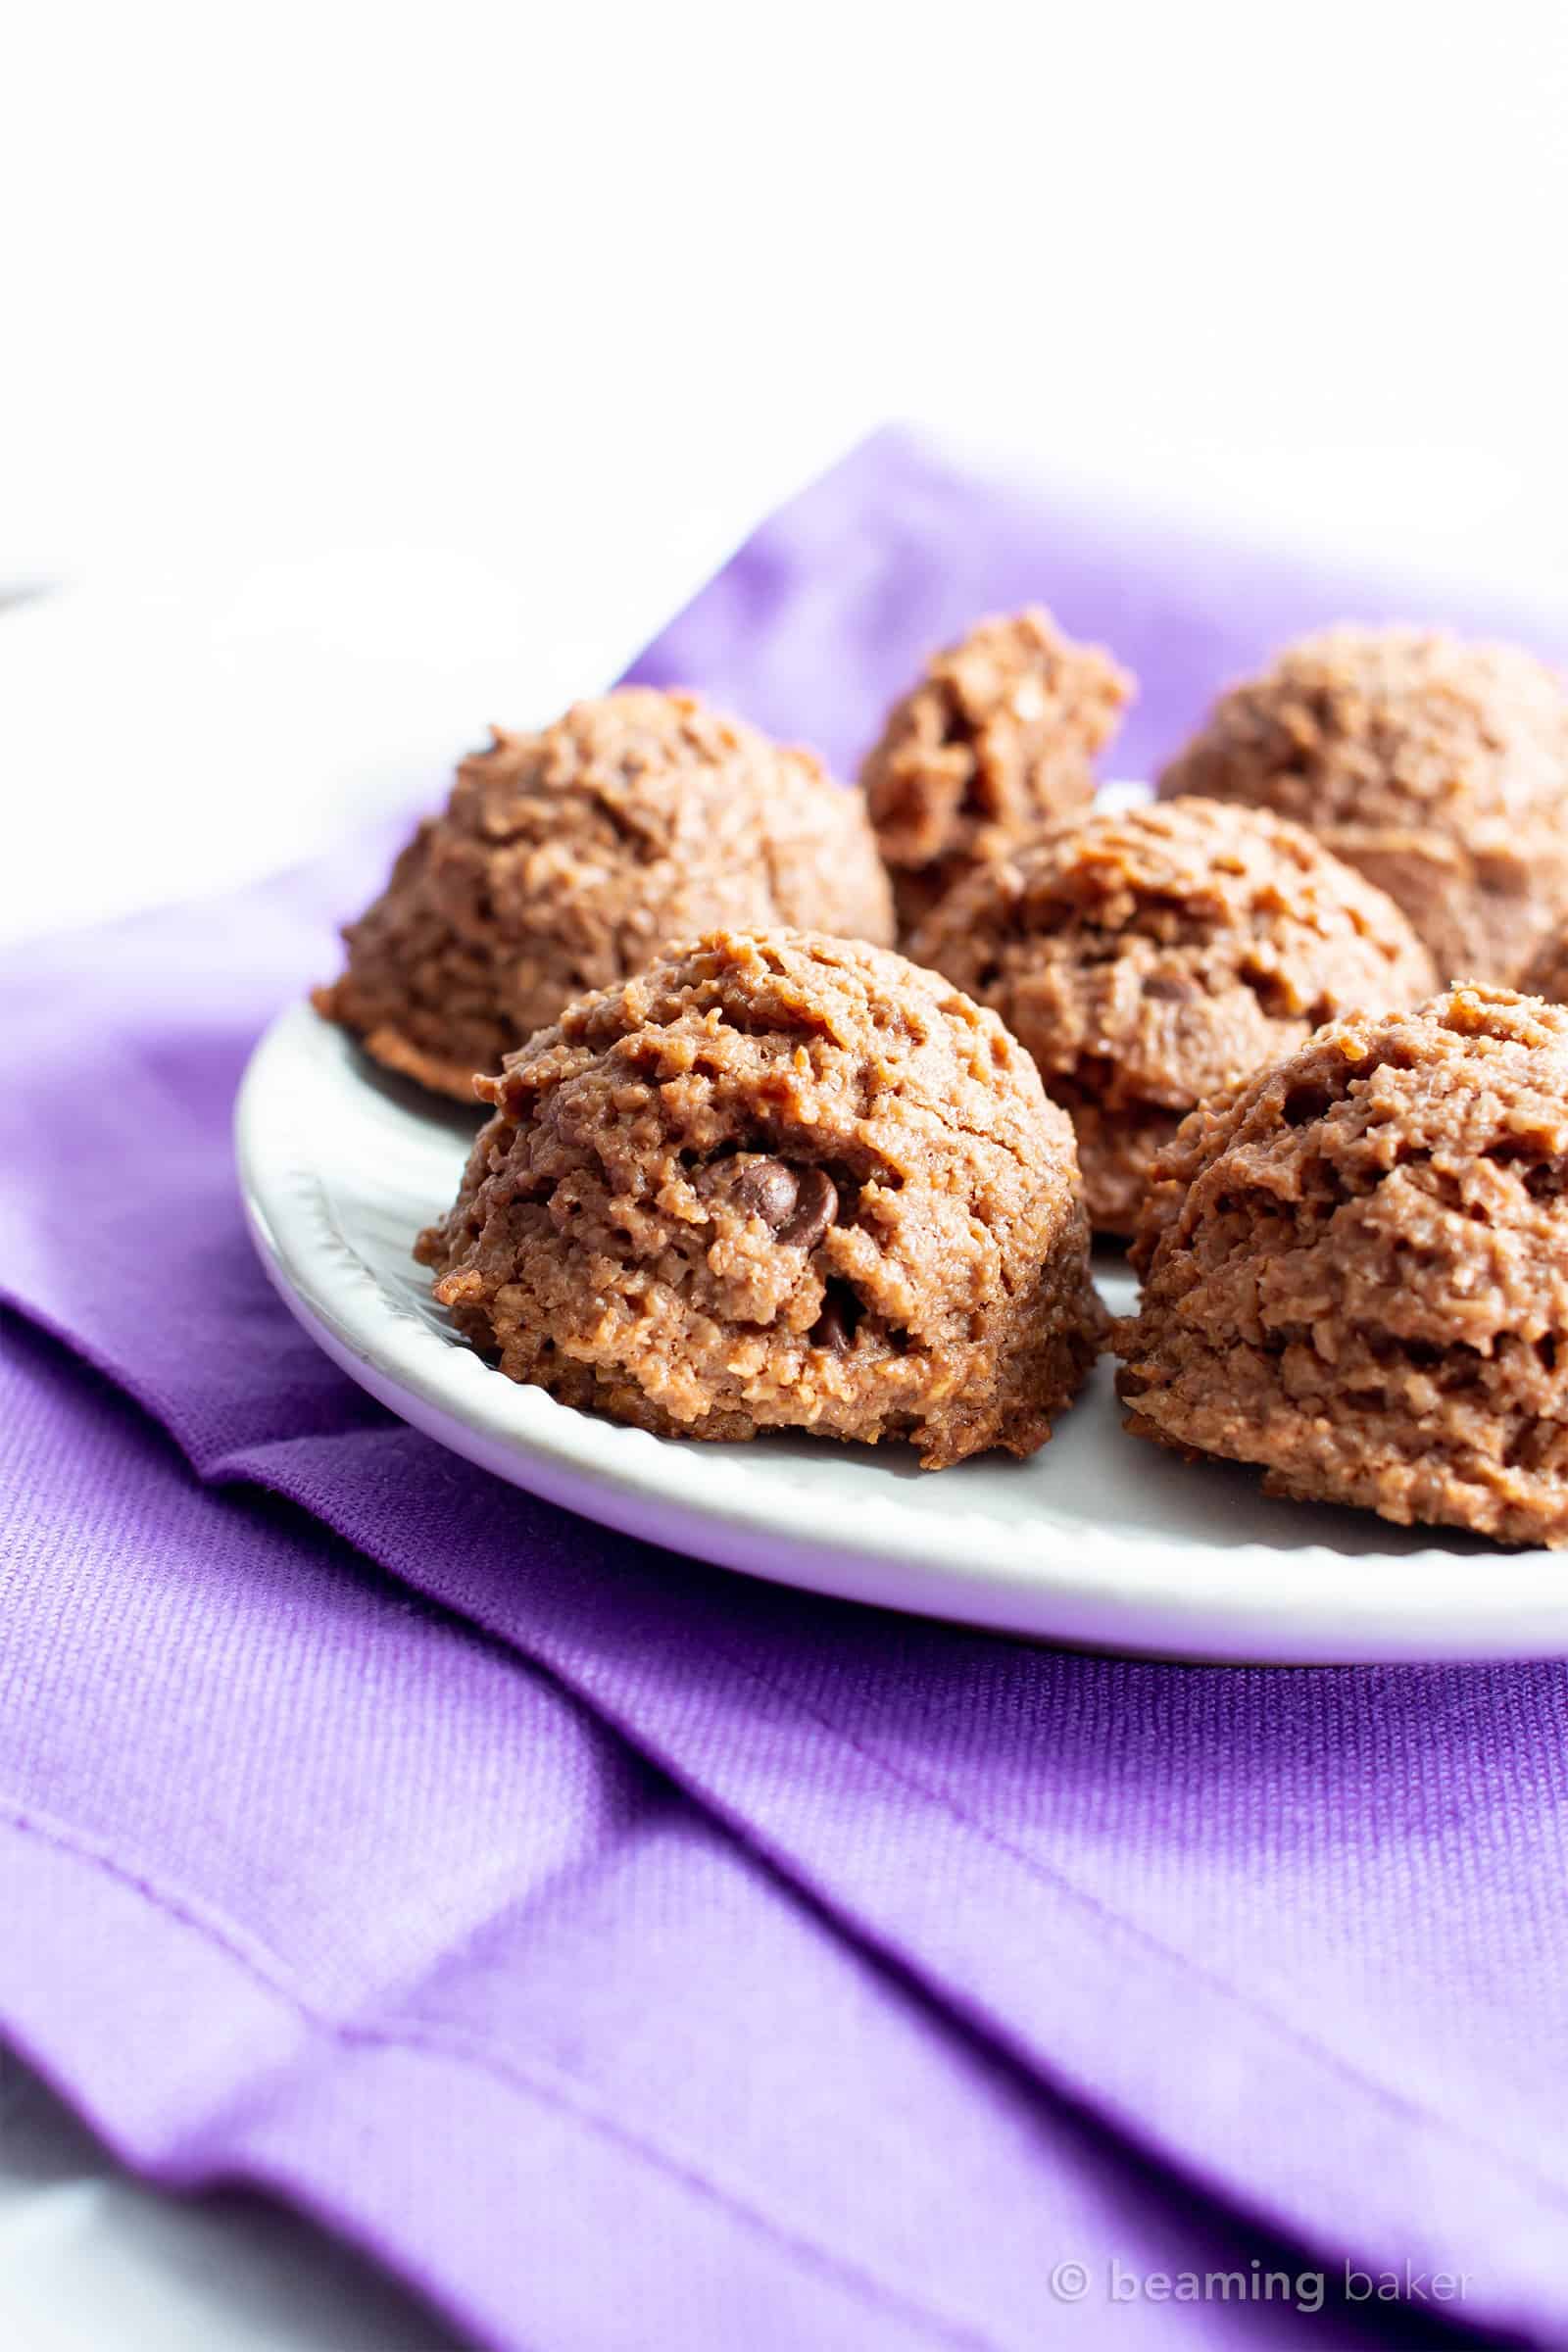 Paleo Chocolate Coconut Macaroons Recipe (V, GF): an easy recipe for deliciously chewy chocolate macaroon cookies bursting with 2x the amount of chocolate! Made with healthy, whole ingredients. #Paleo #Vegan #GlutenFree #Coconut #Macaroons #PaleoDesserts #CleanEating | Recipe at BeamingBaker.com